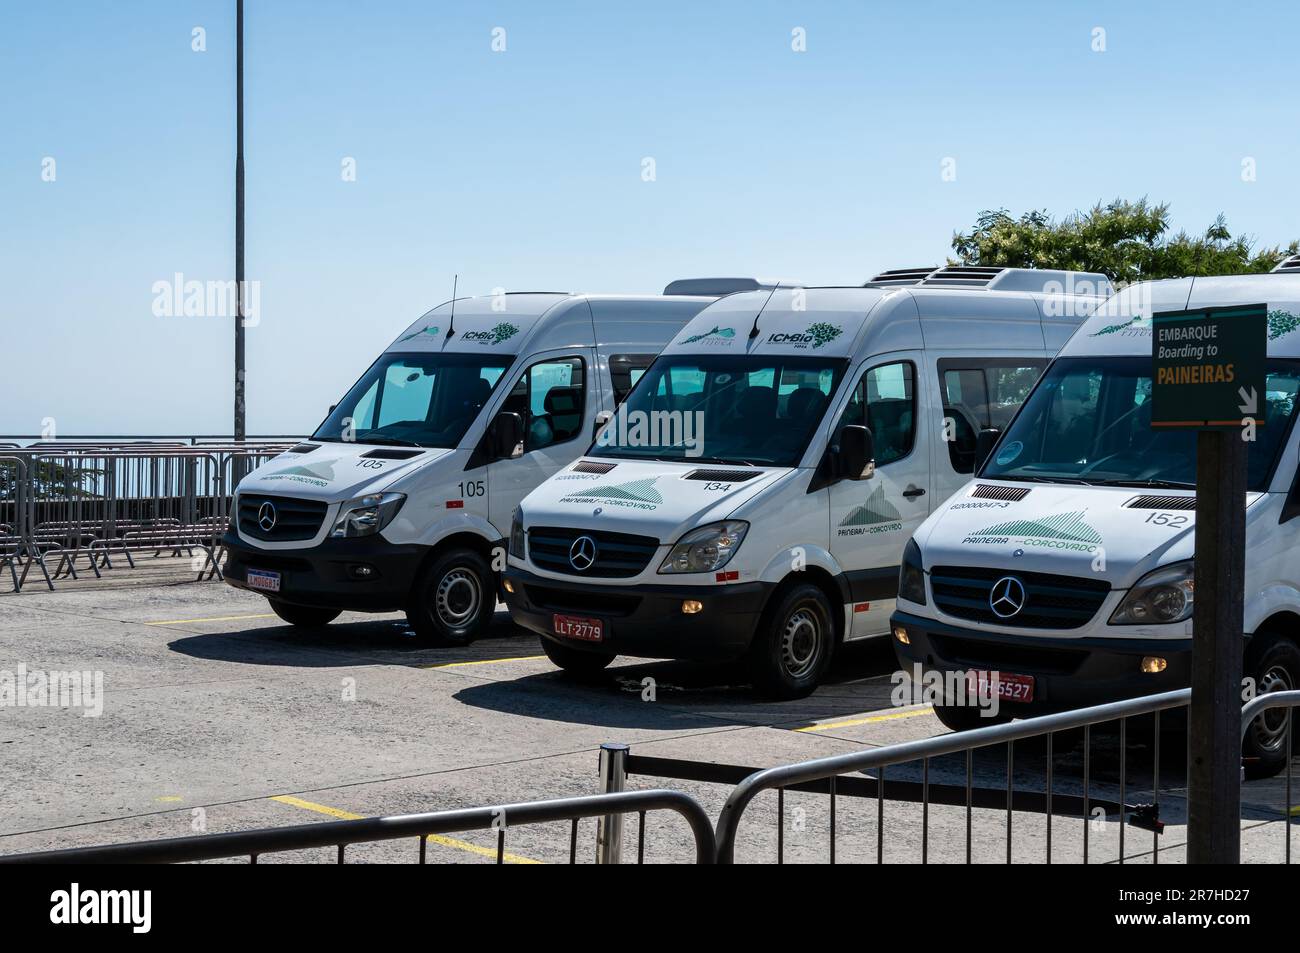 Mercedes-Benz Sprinter vans parked on the summit of Corcovado mountain, used to transport tourists to the top nearby Christ the Redeemer statue. Stock Photo